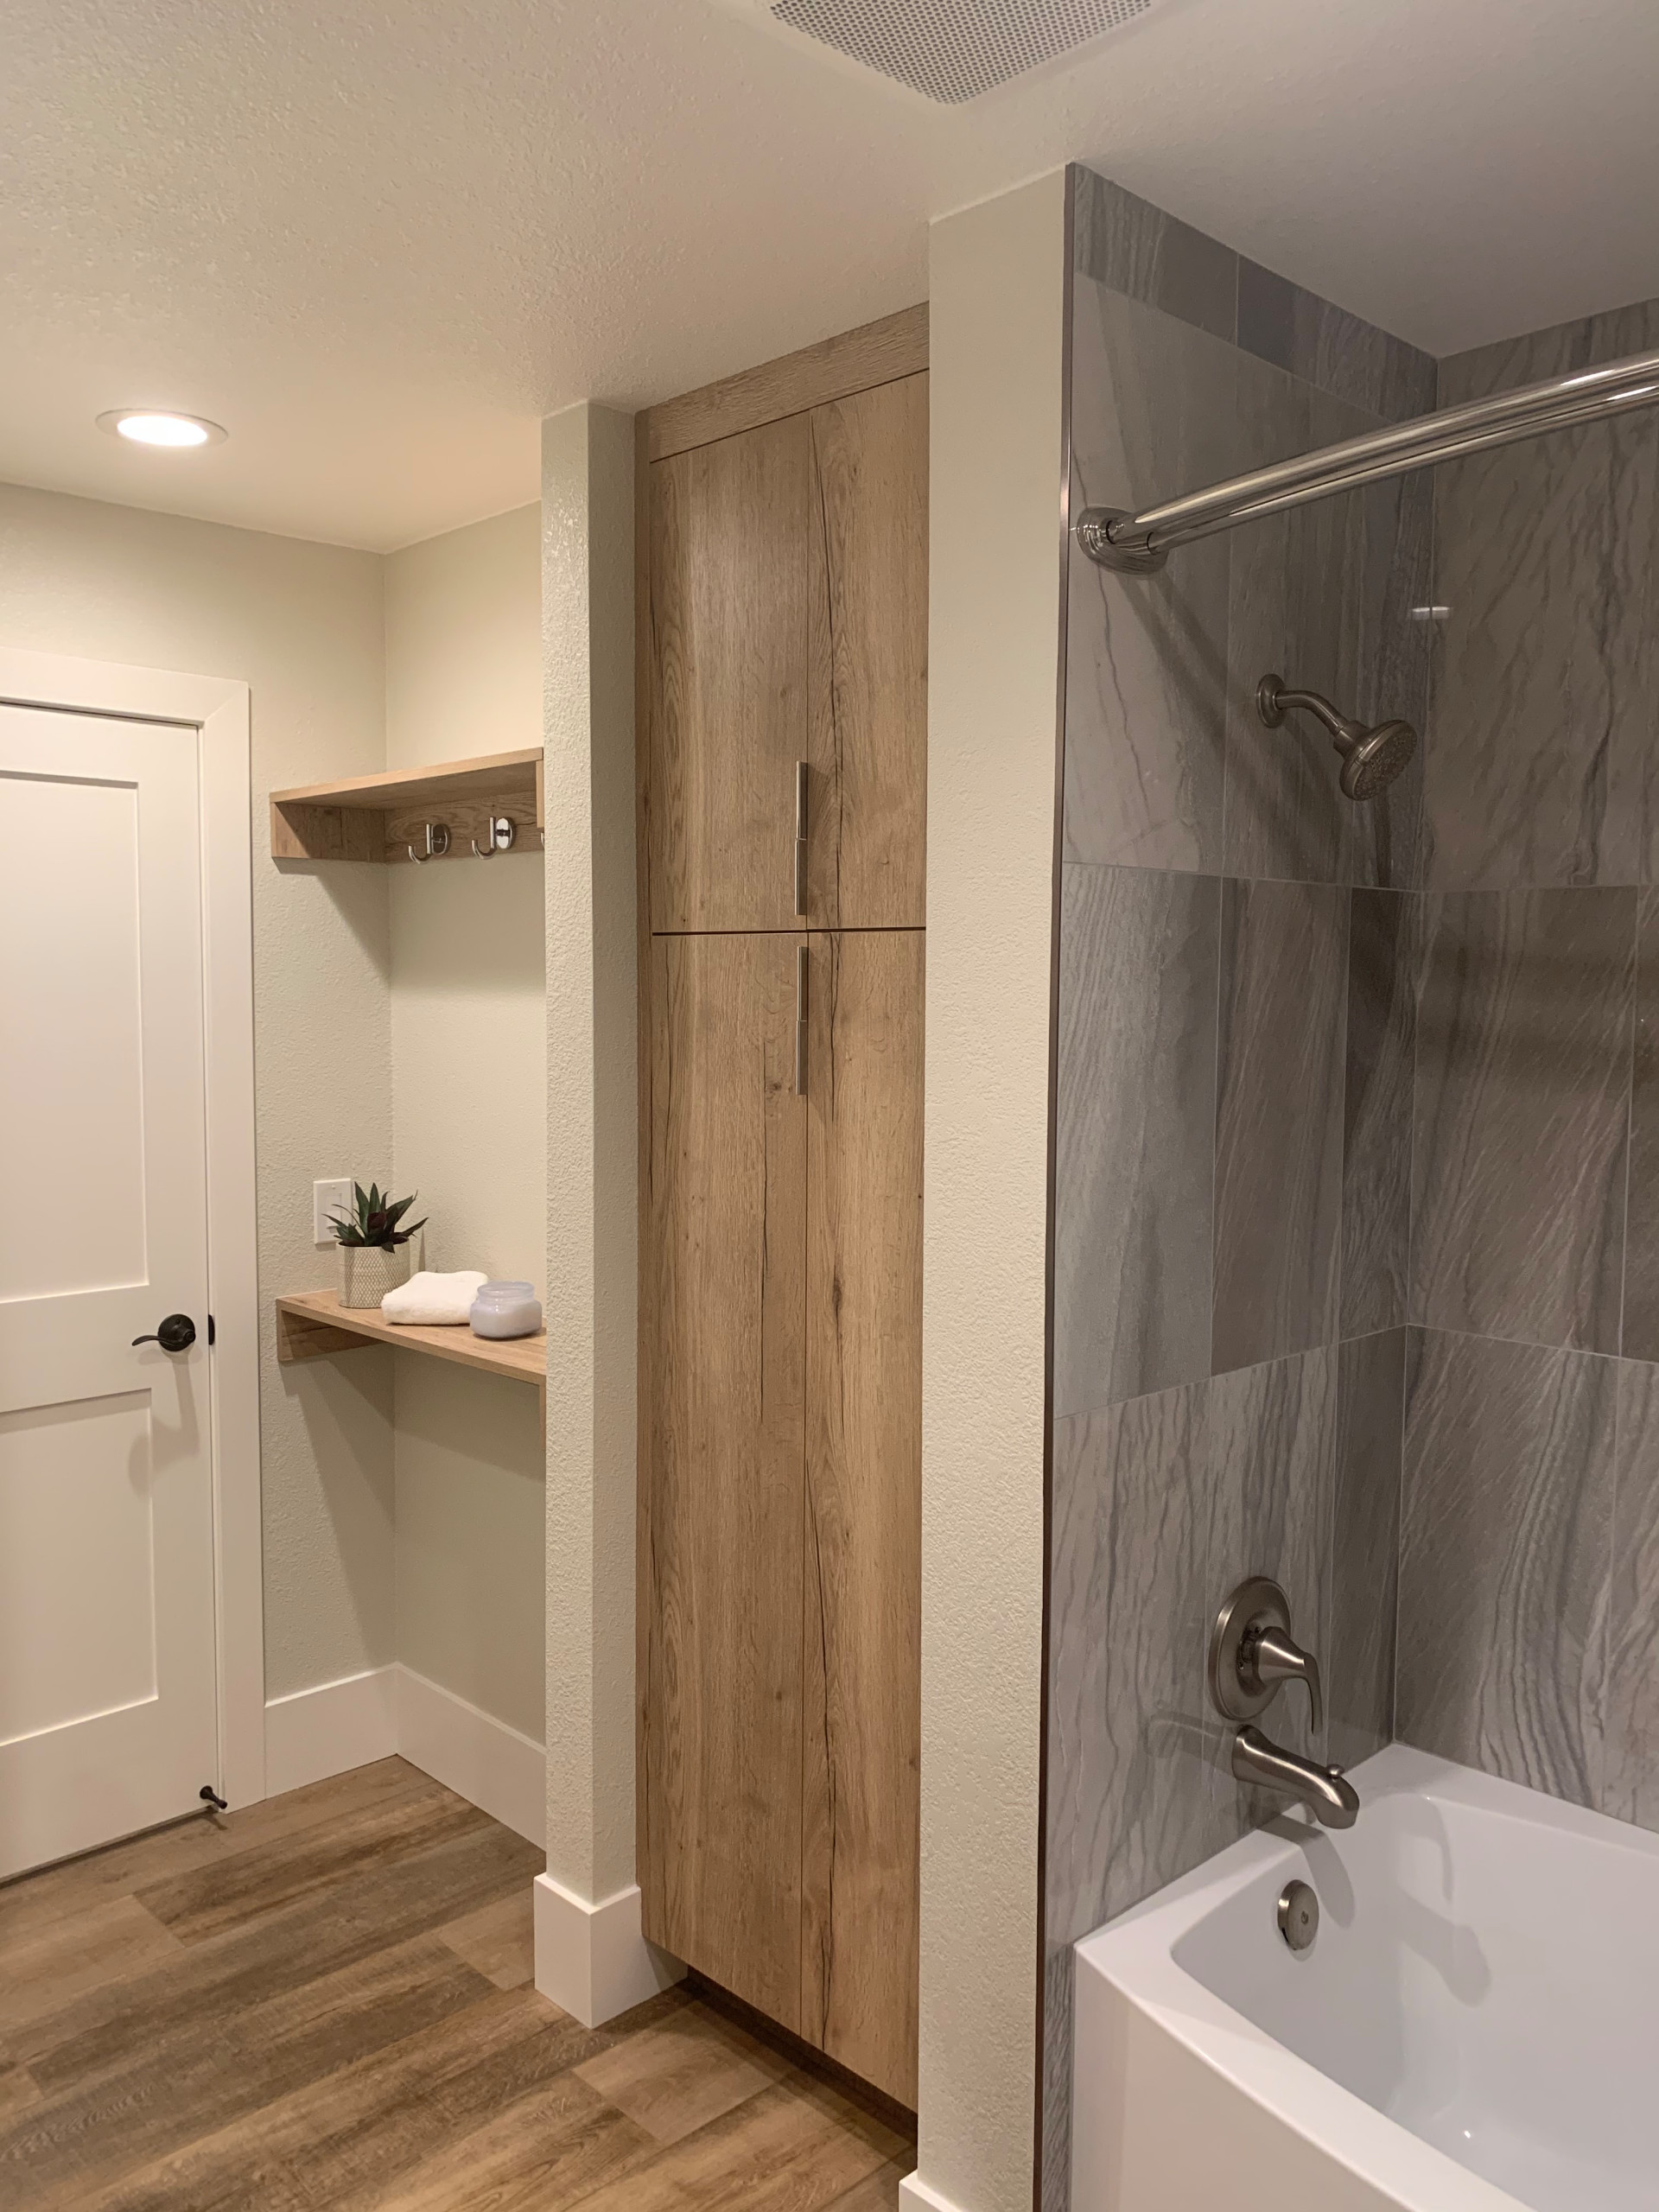 HALL BATH RECONFIGURE-Moved Commode for More Storage